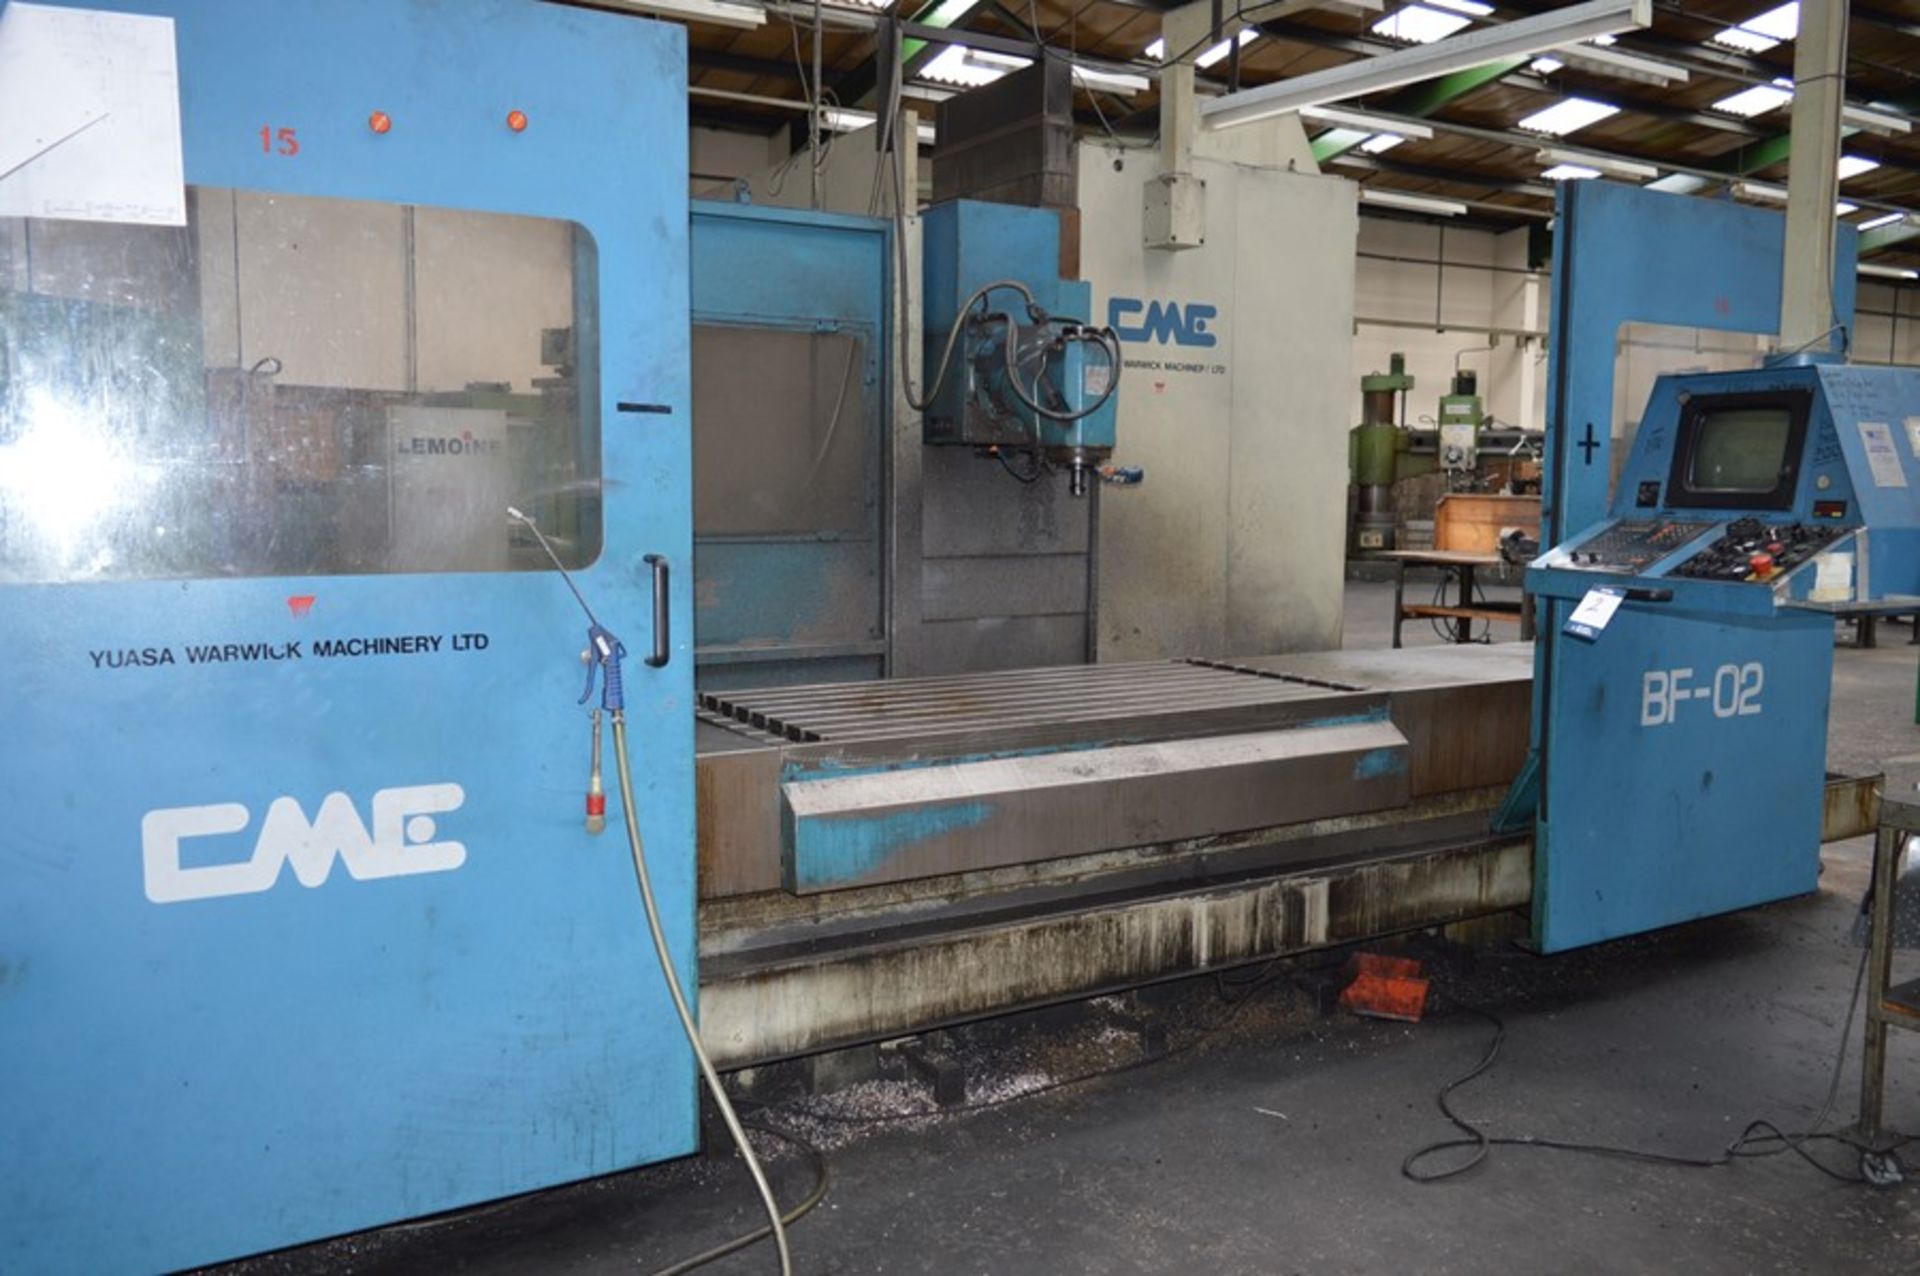 CME, BF-02 CNC bed type milling machine, Serial No. 02/133 (1996) with Heidehain CNC controls,